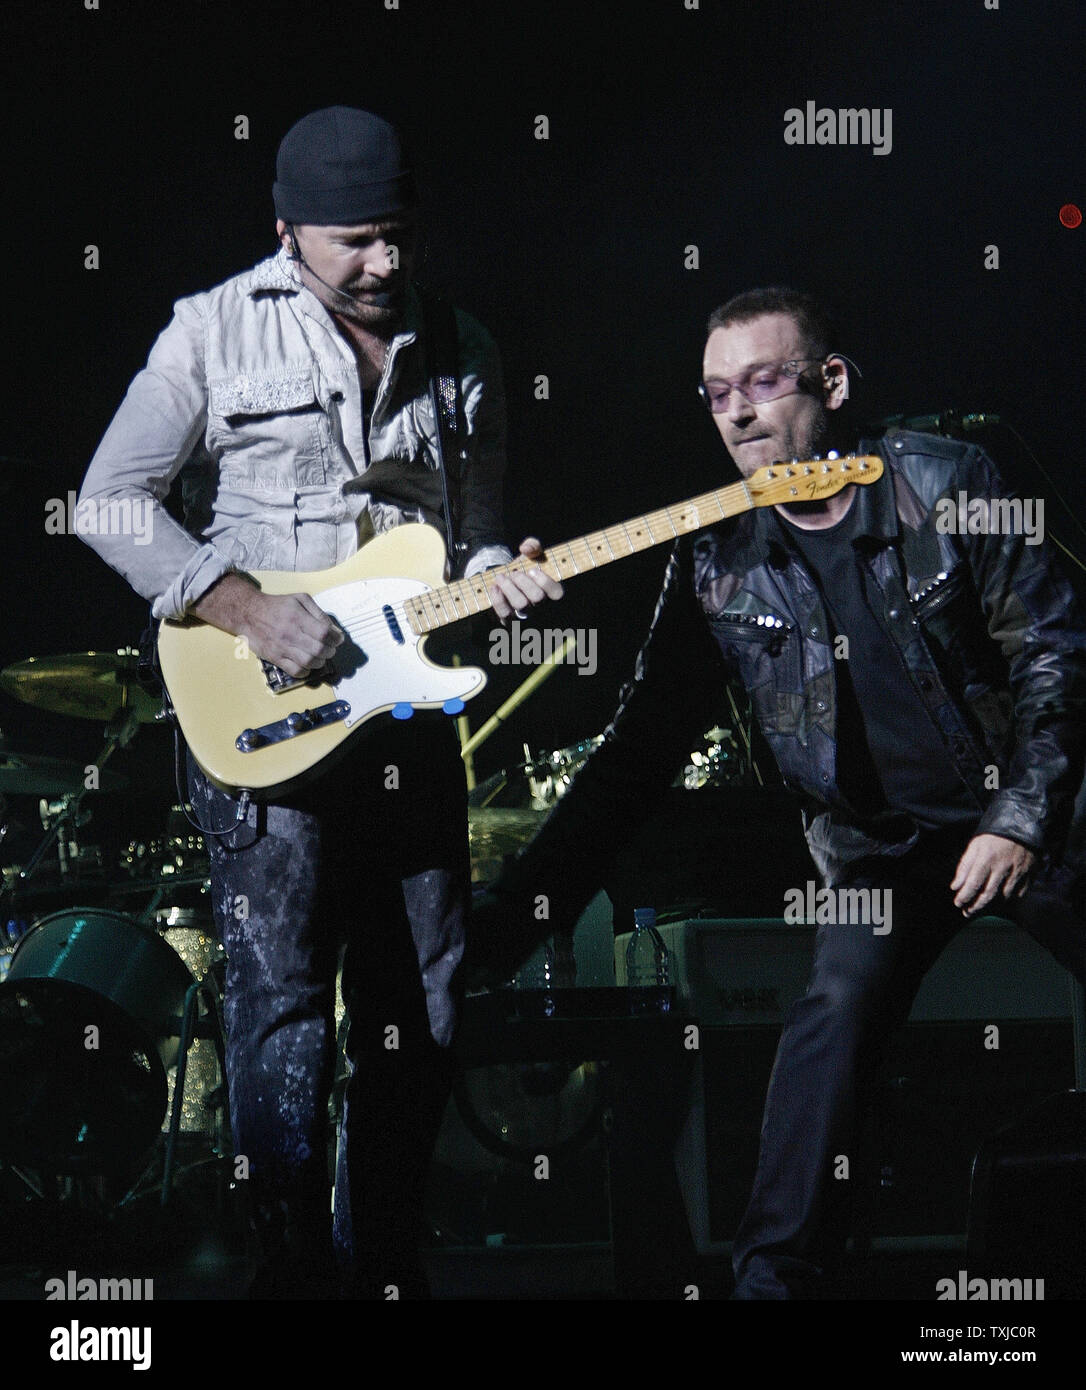 The Edge (L) and Bono of U2 perform the first concert of their 360 Degree North American Tour at Soldier Field in Chicago on September 12, 2009.     UPI/Brian Kersey Stock Photo